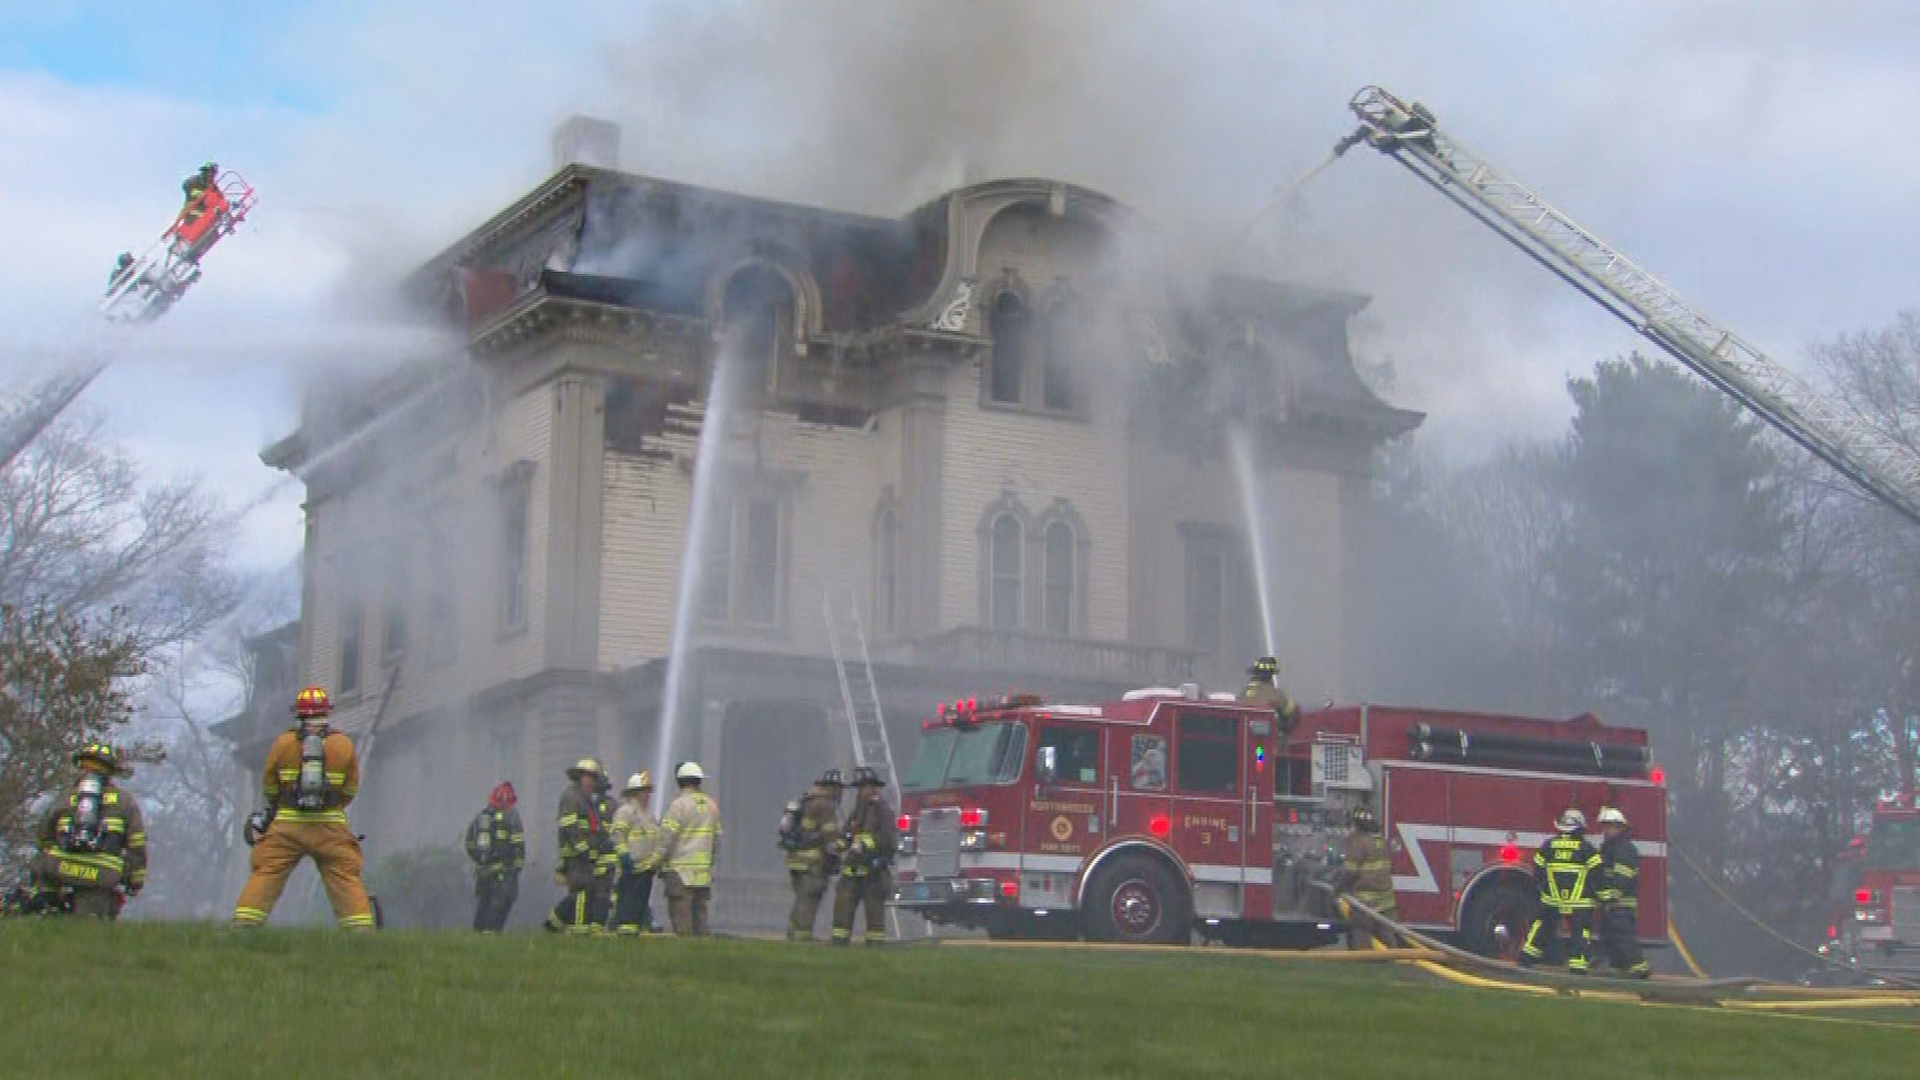 Historic Victorian Home In Northbridge Destroyed By Fire – CBS Boston